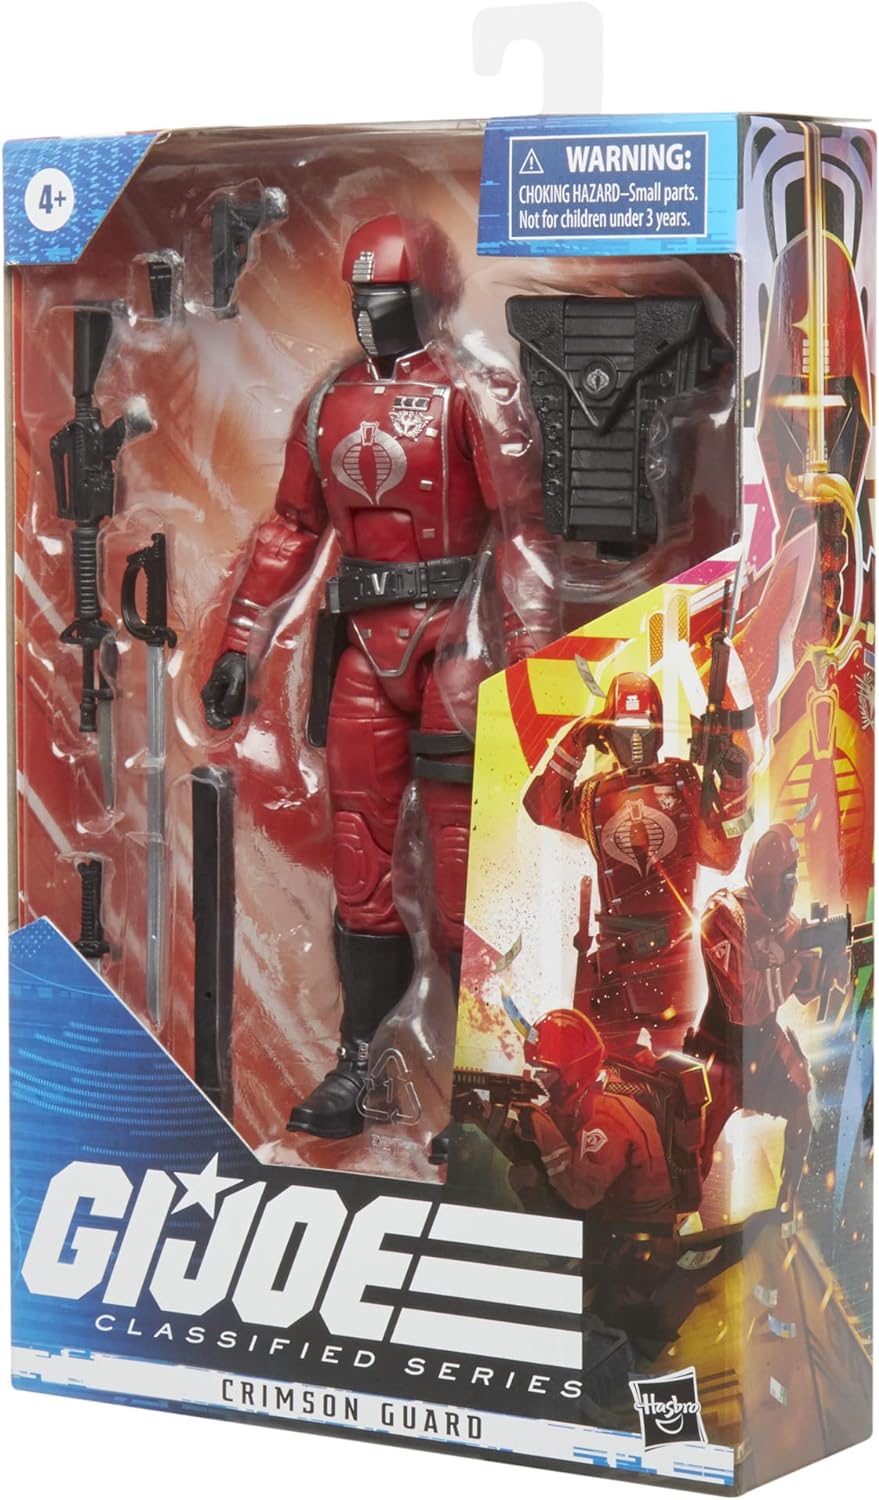 G.I. Joe Classified Series Crimson Guard Action Figure 50 Collectible Premium Toys, Multiple Accessories 6-Inch-Scale and Custom Package Art